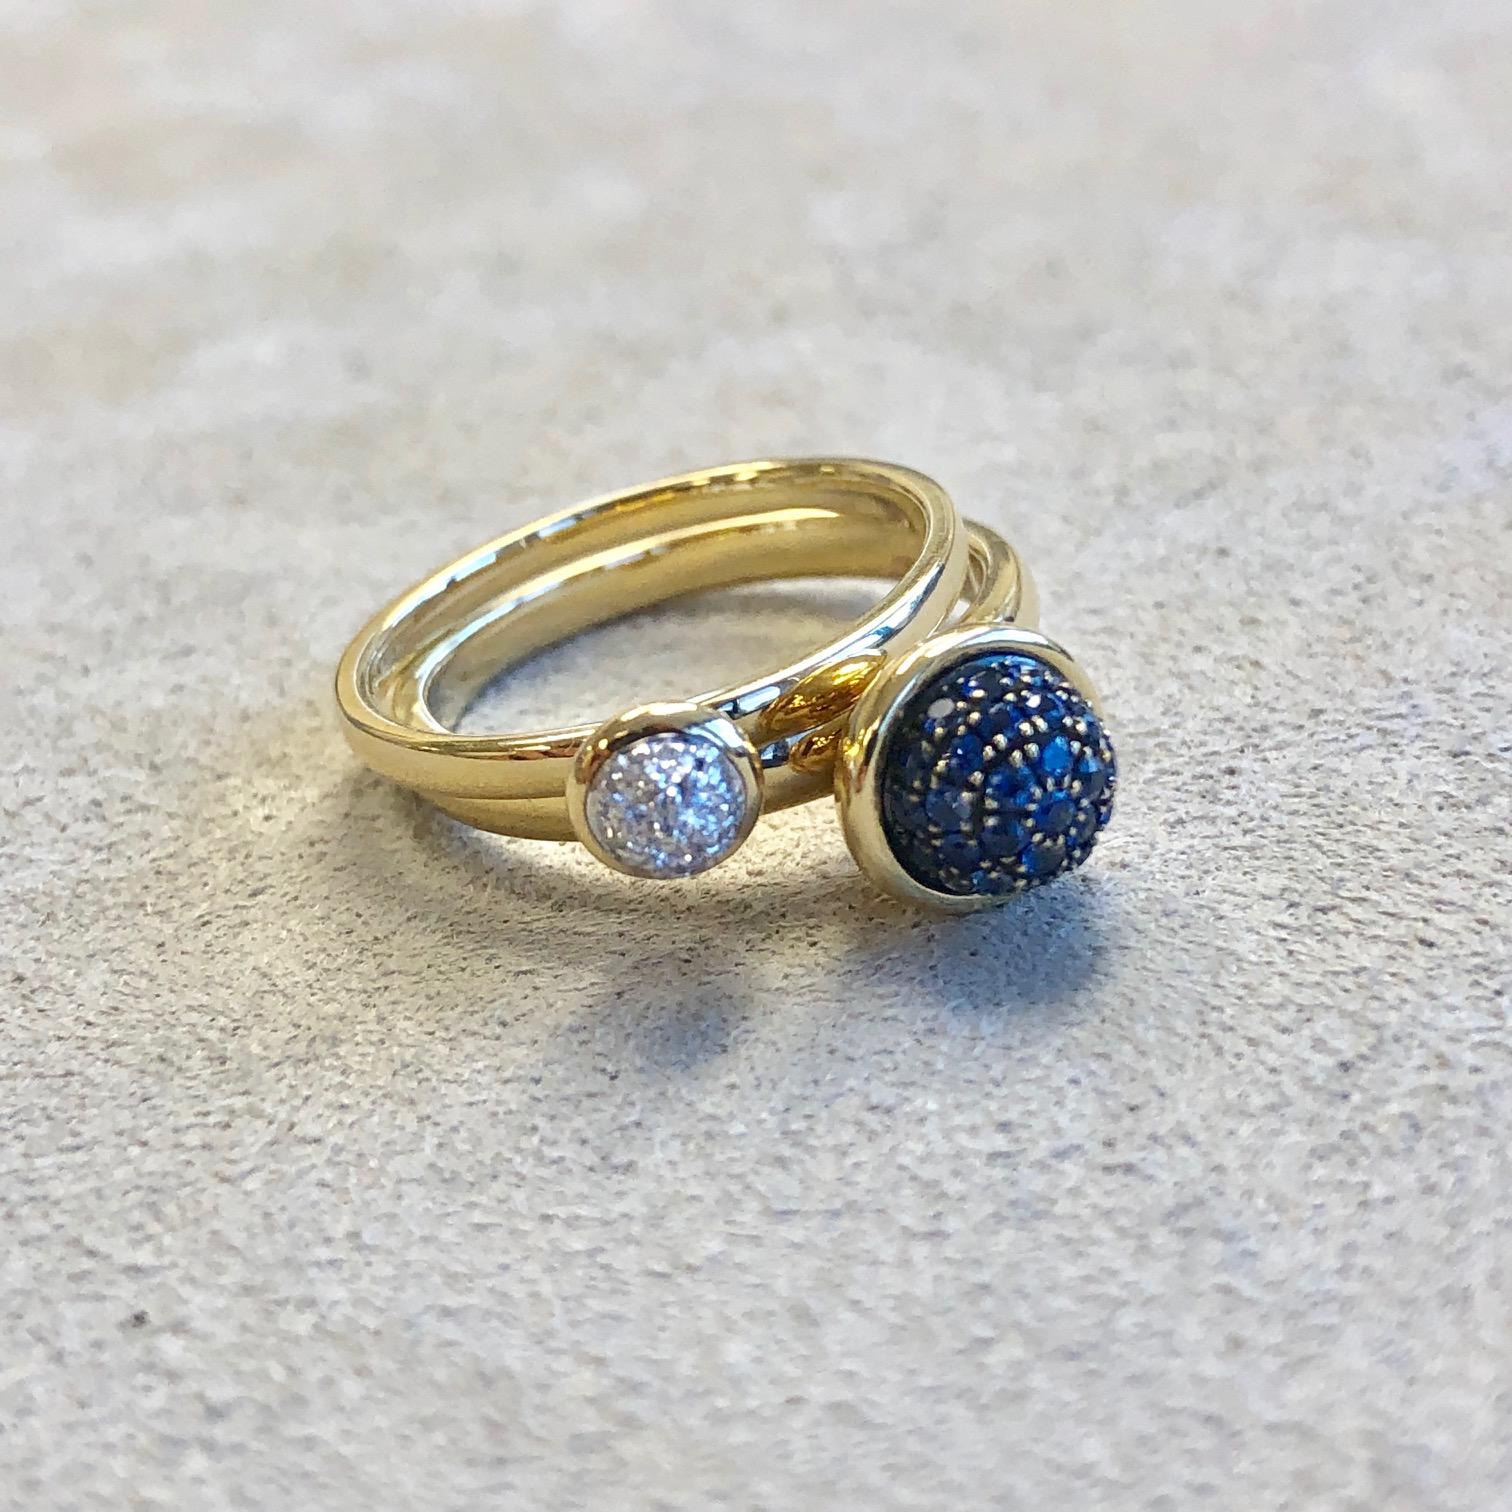 Created in 18 karat yellow gold
Blue sapphire  0.30 cts approx
Diamonds 0.10 cts approx
Pair of two stacking rings
Bleu sapphire pave 7mm diameter approx
Diamond pave ring 5 mm diameter approx
Ring size US 6.5, can be sized upon request.

Enveloped